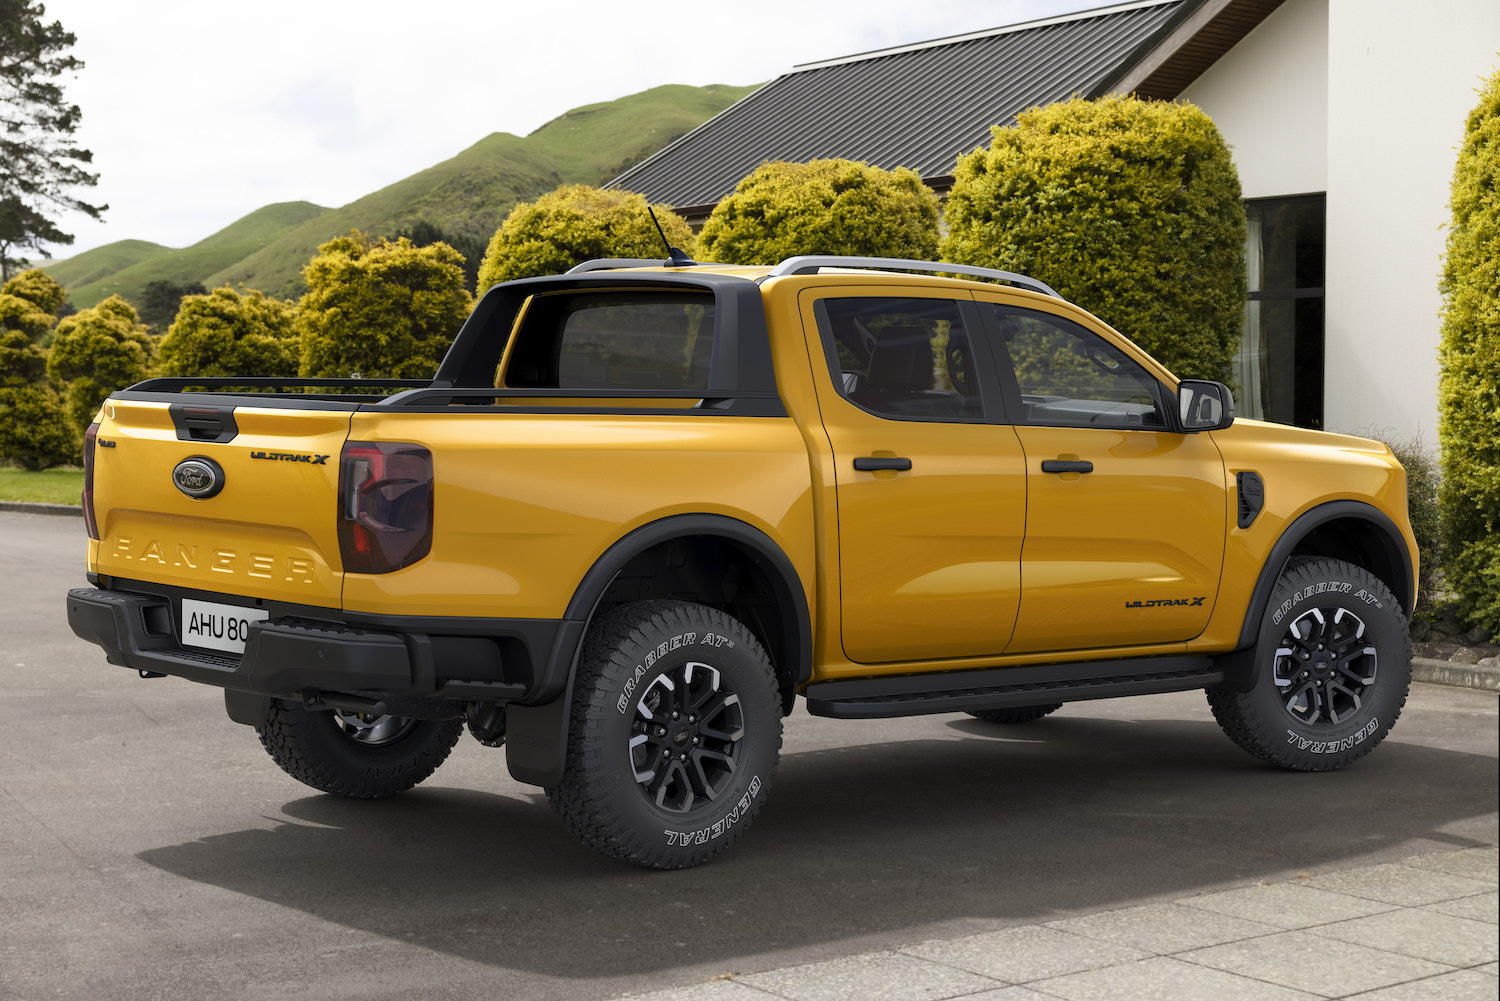 Ford Ranger Ford Launches Ranger Wildtrak X and Tremor Models for Europe with New Features & Styling 2023_FORD_RANGER_WT-X_4